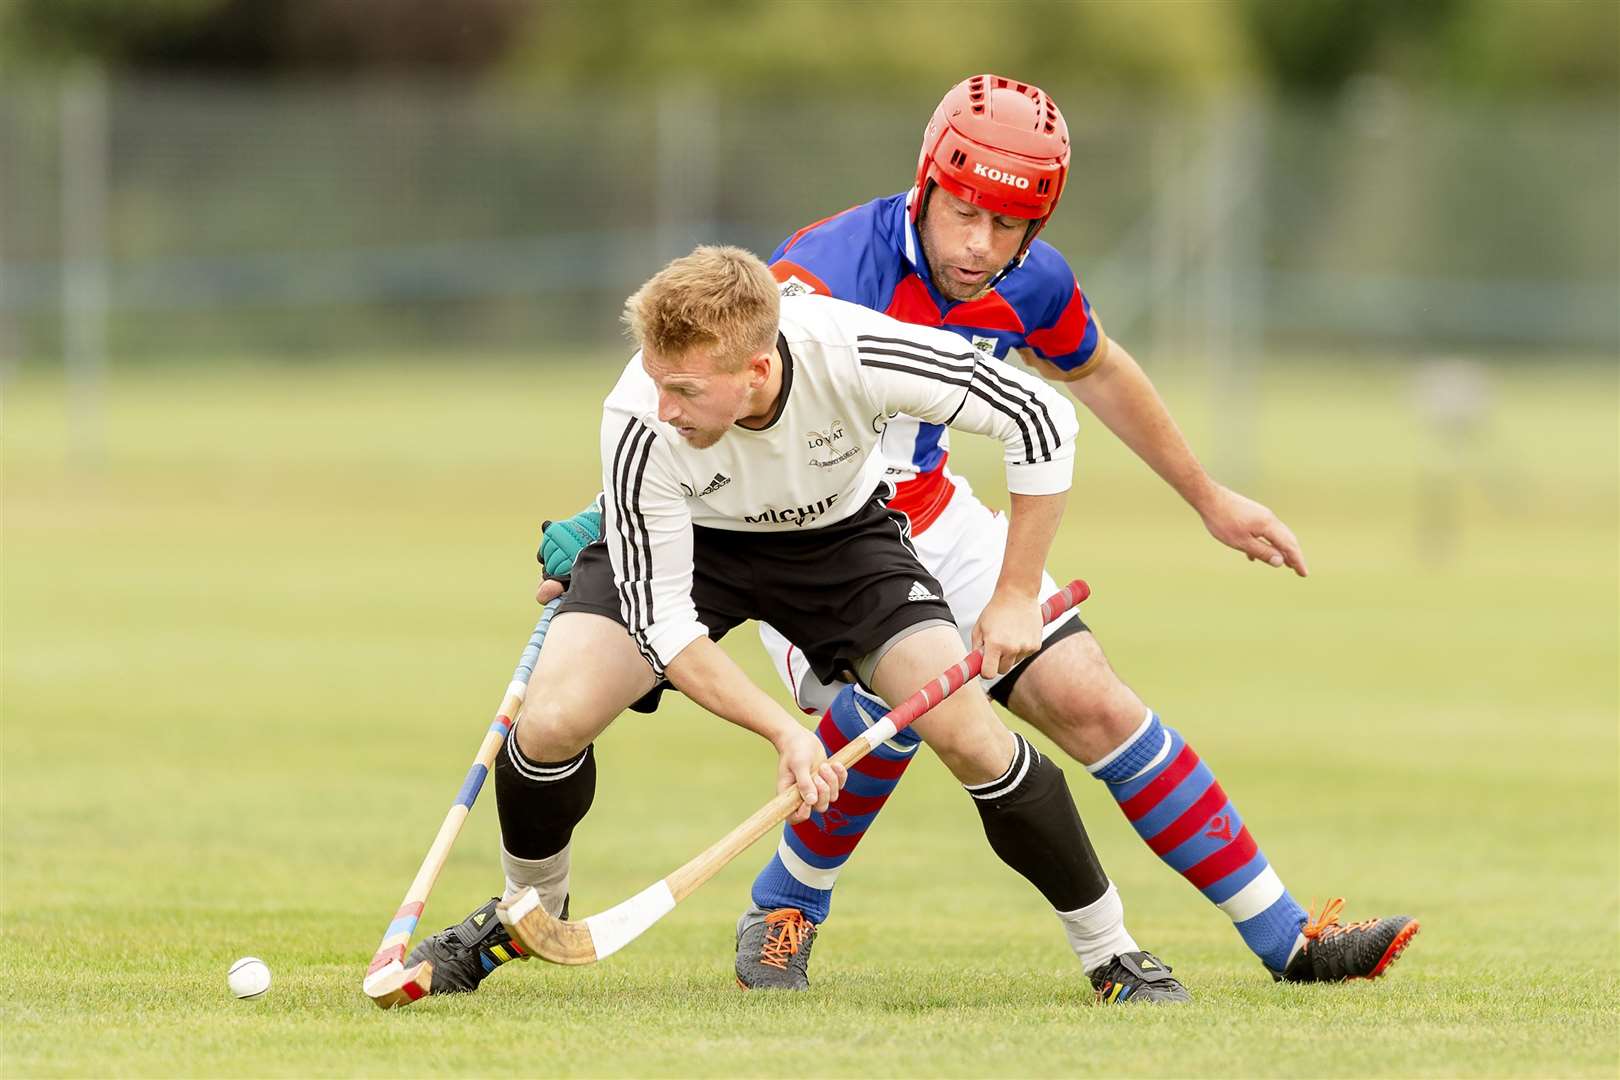 James Hutchison puts a tackle in on Lorne Mackay (Lovat) in a Tulloch Homes Camanachd Cup semi final played at The Bught, Inverness.